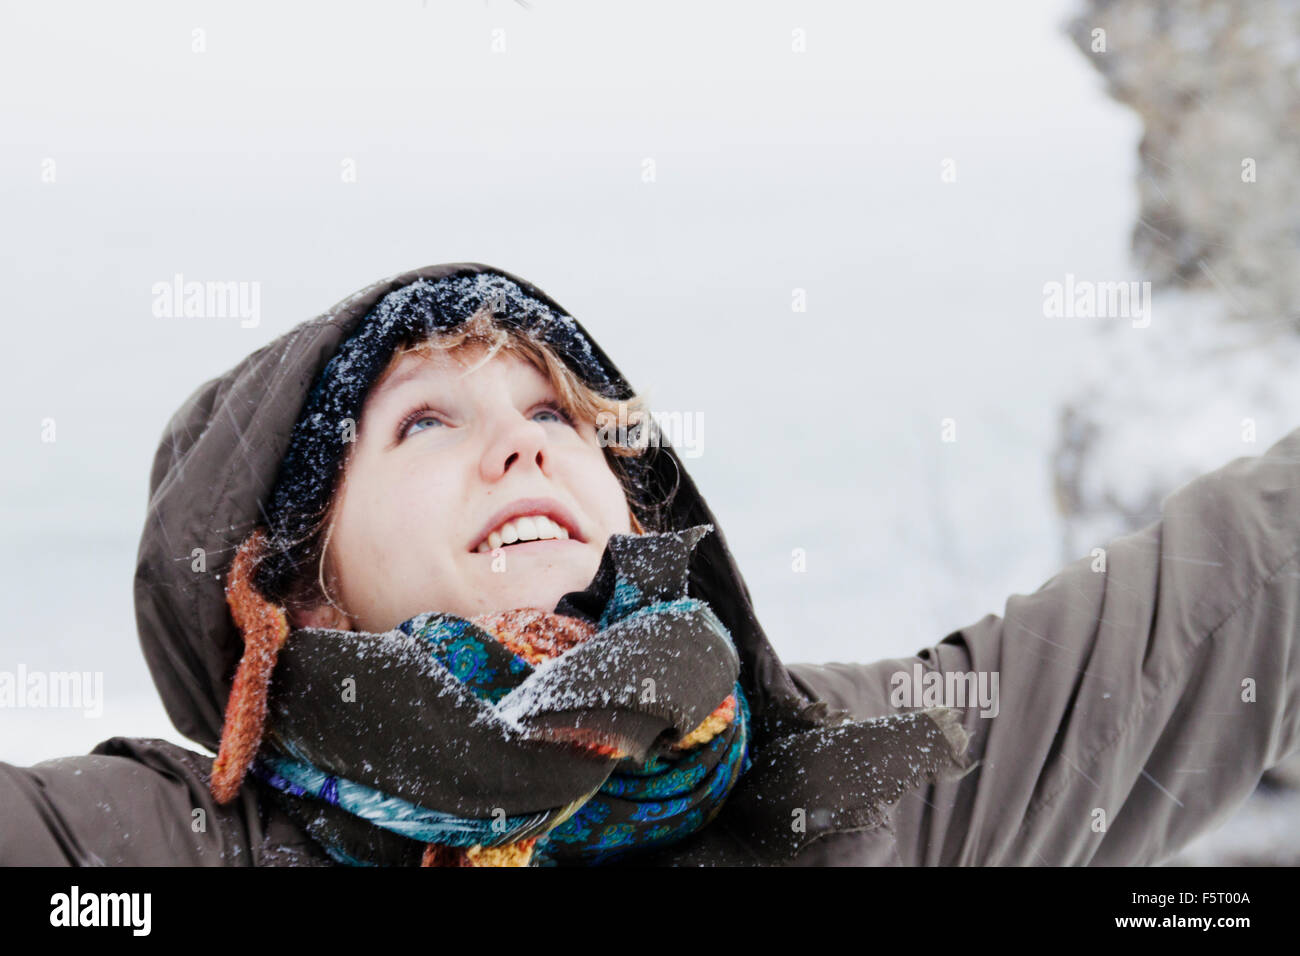 Sweden, Gotland, Young woman in snow Stock Photo